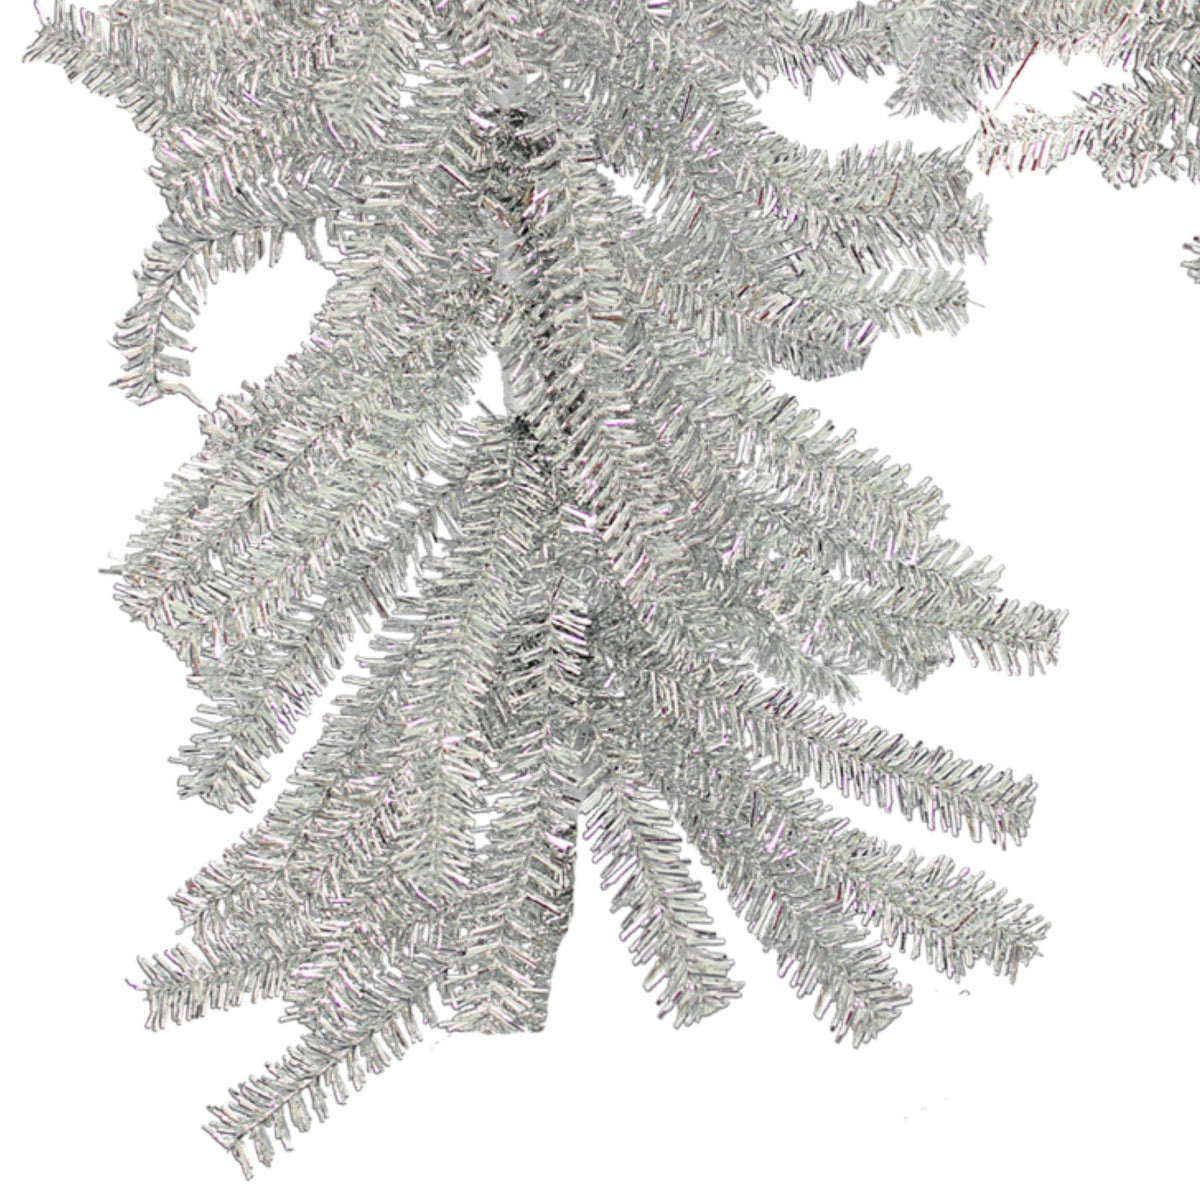 Shop for Lee Display's brand new 6FT Silver 1in Tinsel Brush Garlands on sale at leedisplay.com.  Made with 1in diameter brush